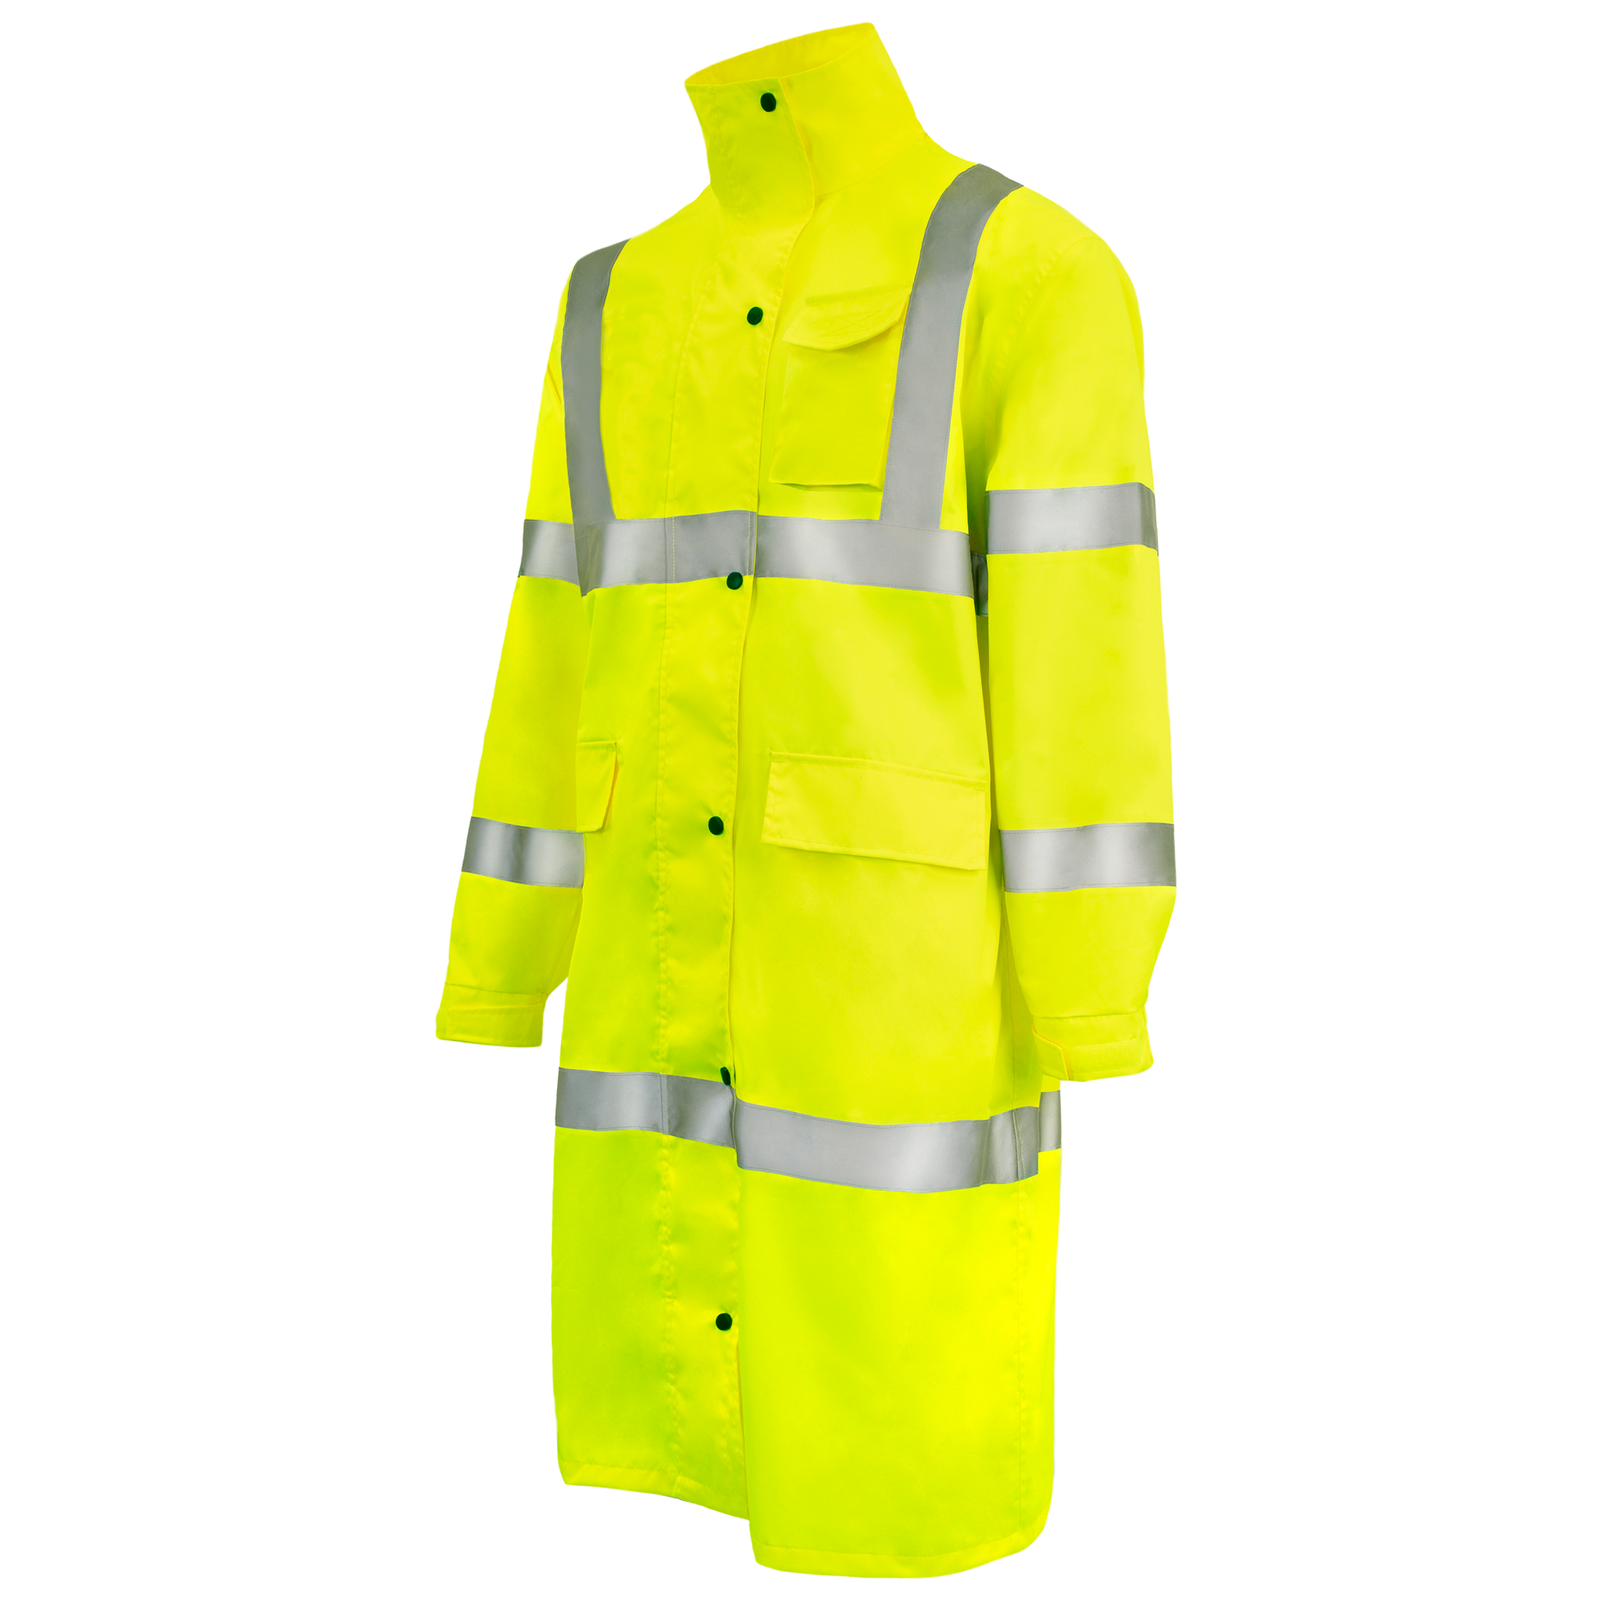 Diagonal view of the JORESTECH Yellow Rain Coat with 2 inch reflective strips